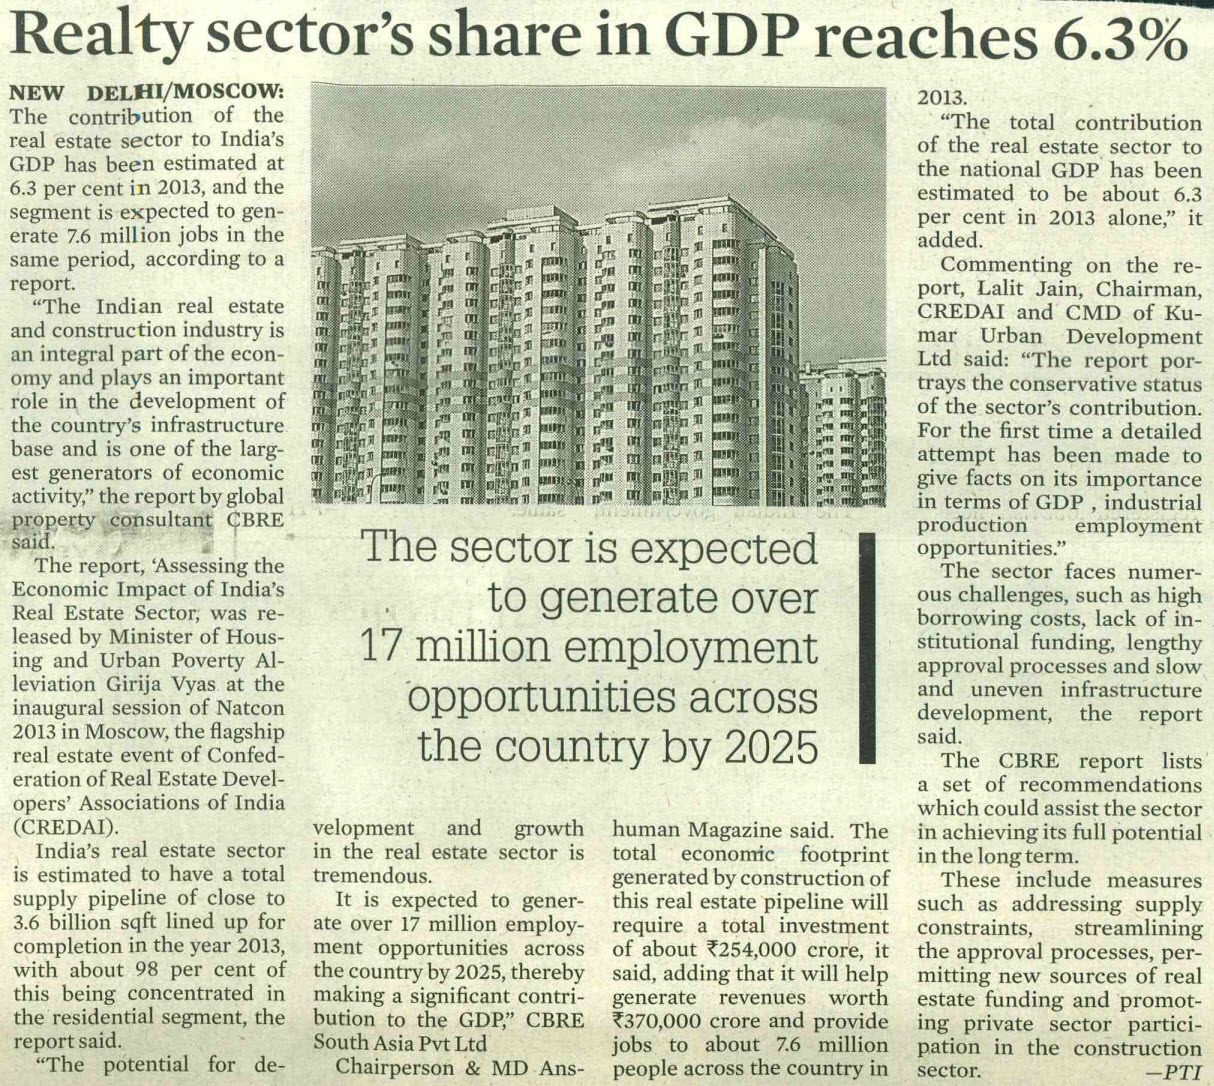 Realty sector's share in GDP reaches 6.3%